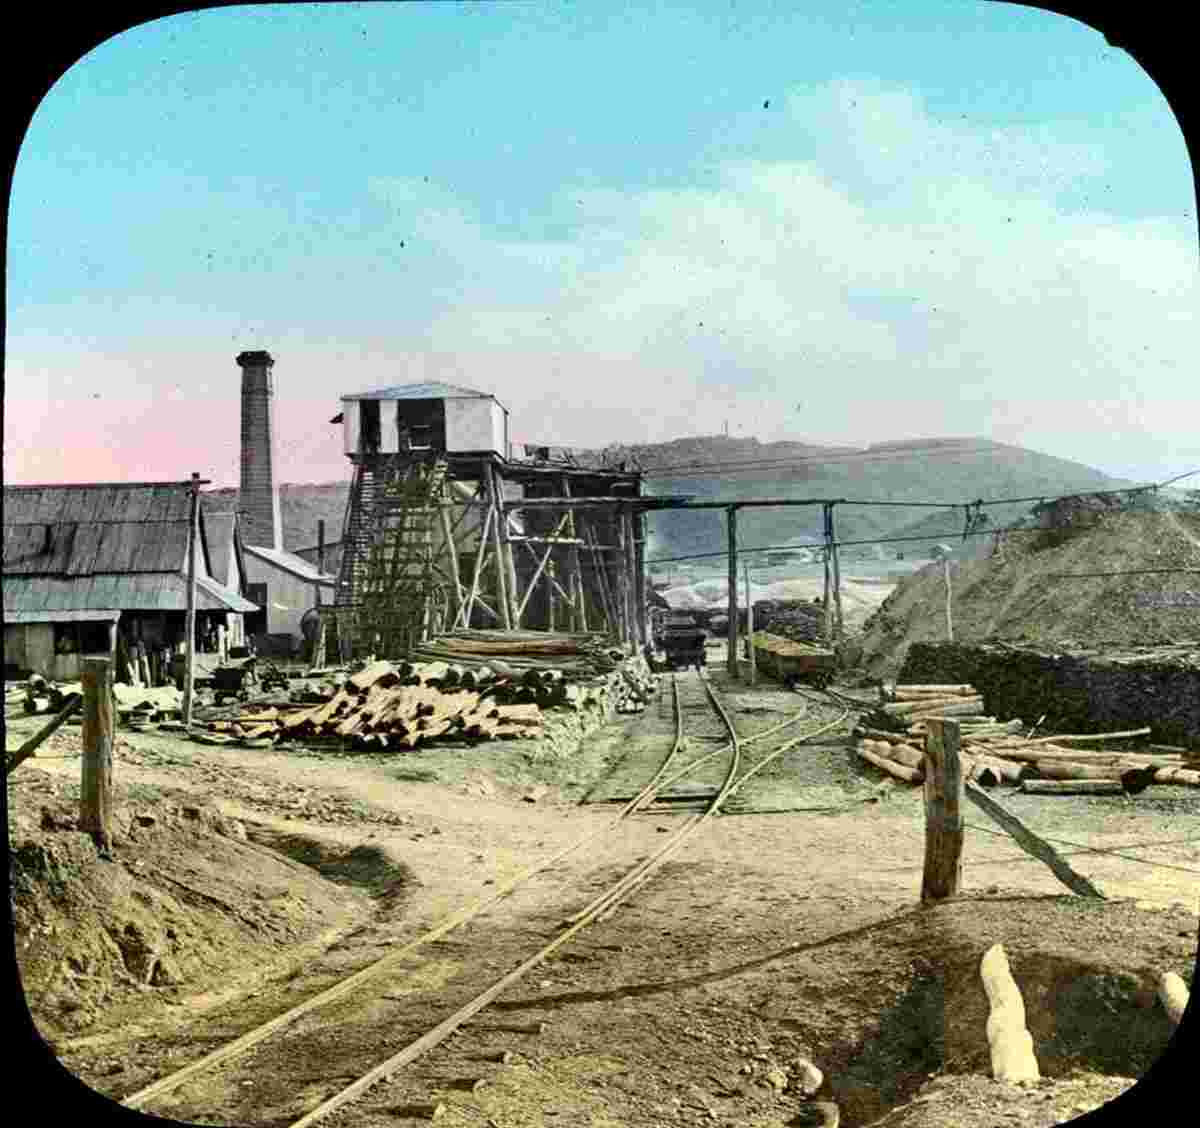 Townsville. Mine viewed from railway tracks